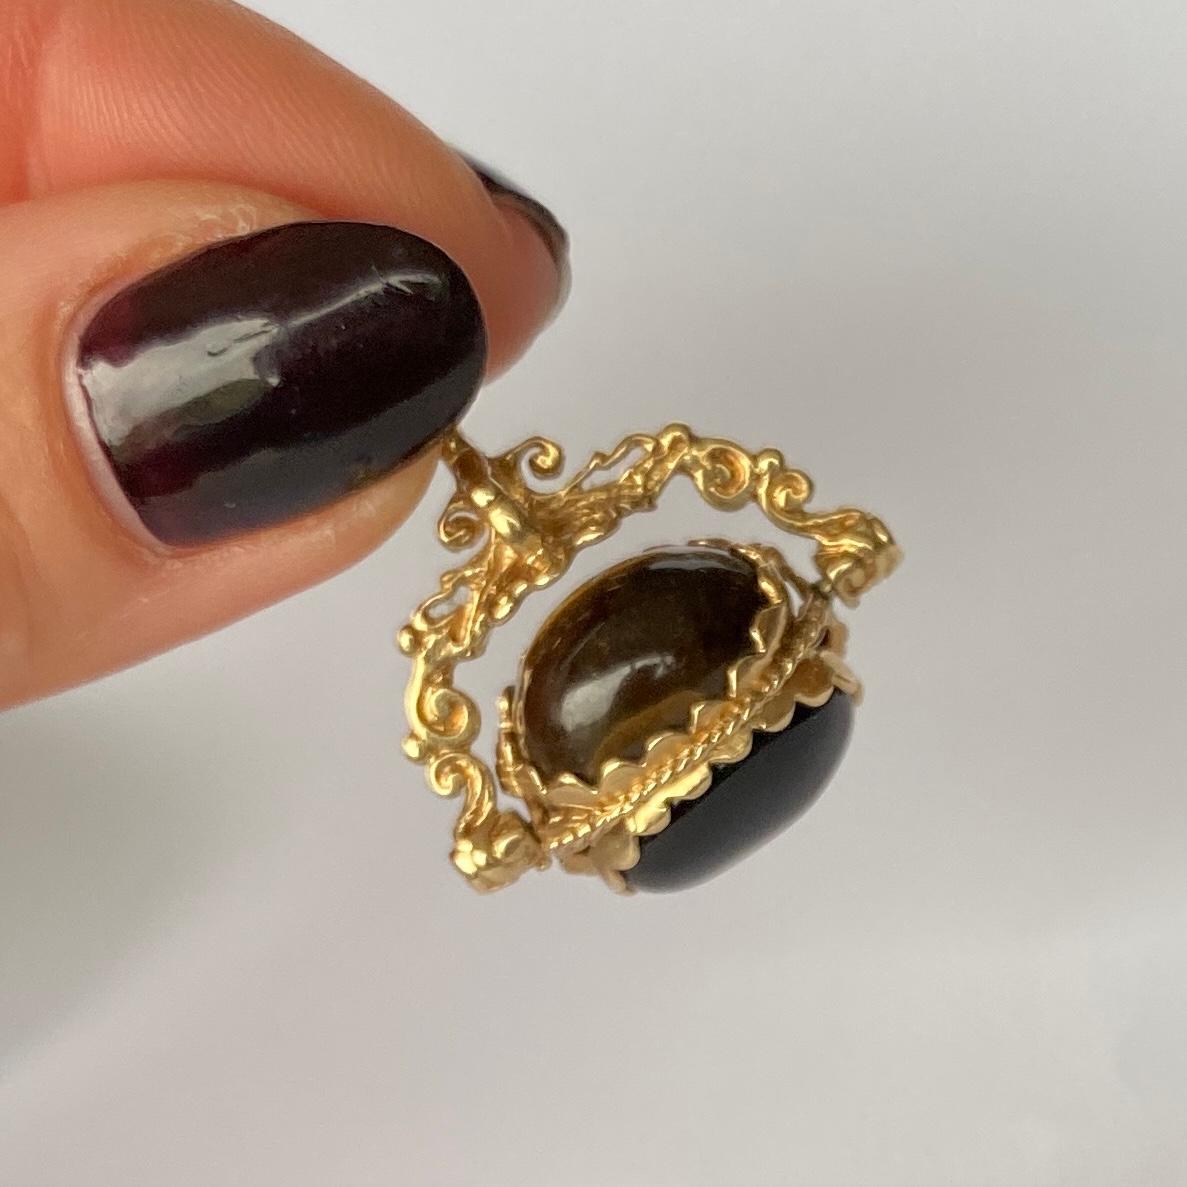 This gorgeous fob pendant contains three oval sides of  carnelian, tigers eye and onyx forming a triple side swivelling fob. Which is pivoted beneath a decorative arch and pendant loop. Modelled in 9ct gold. 

Height inc loop: 30mm

Weight: 7.9g
